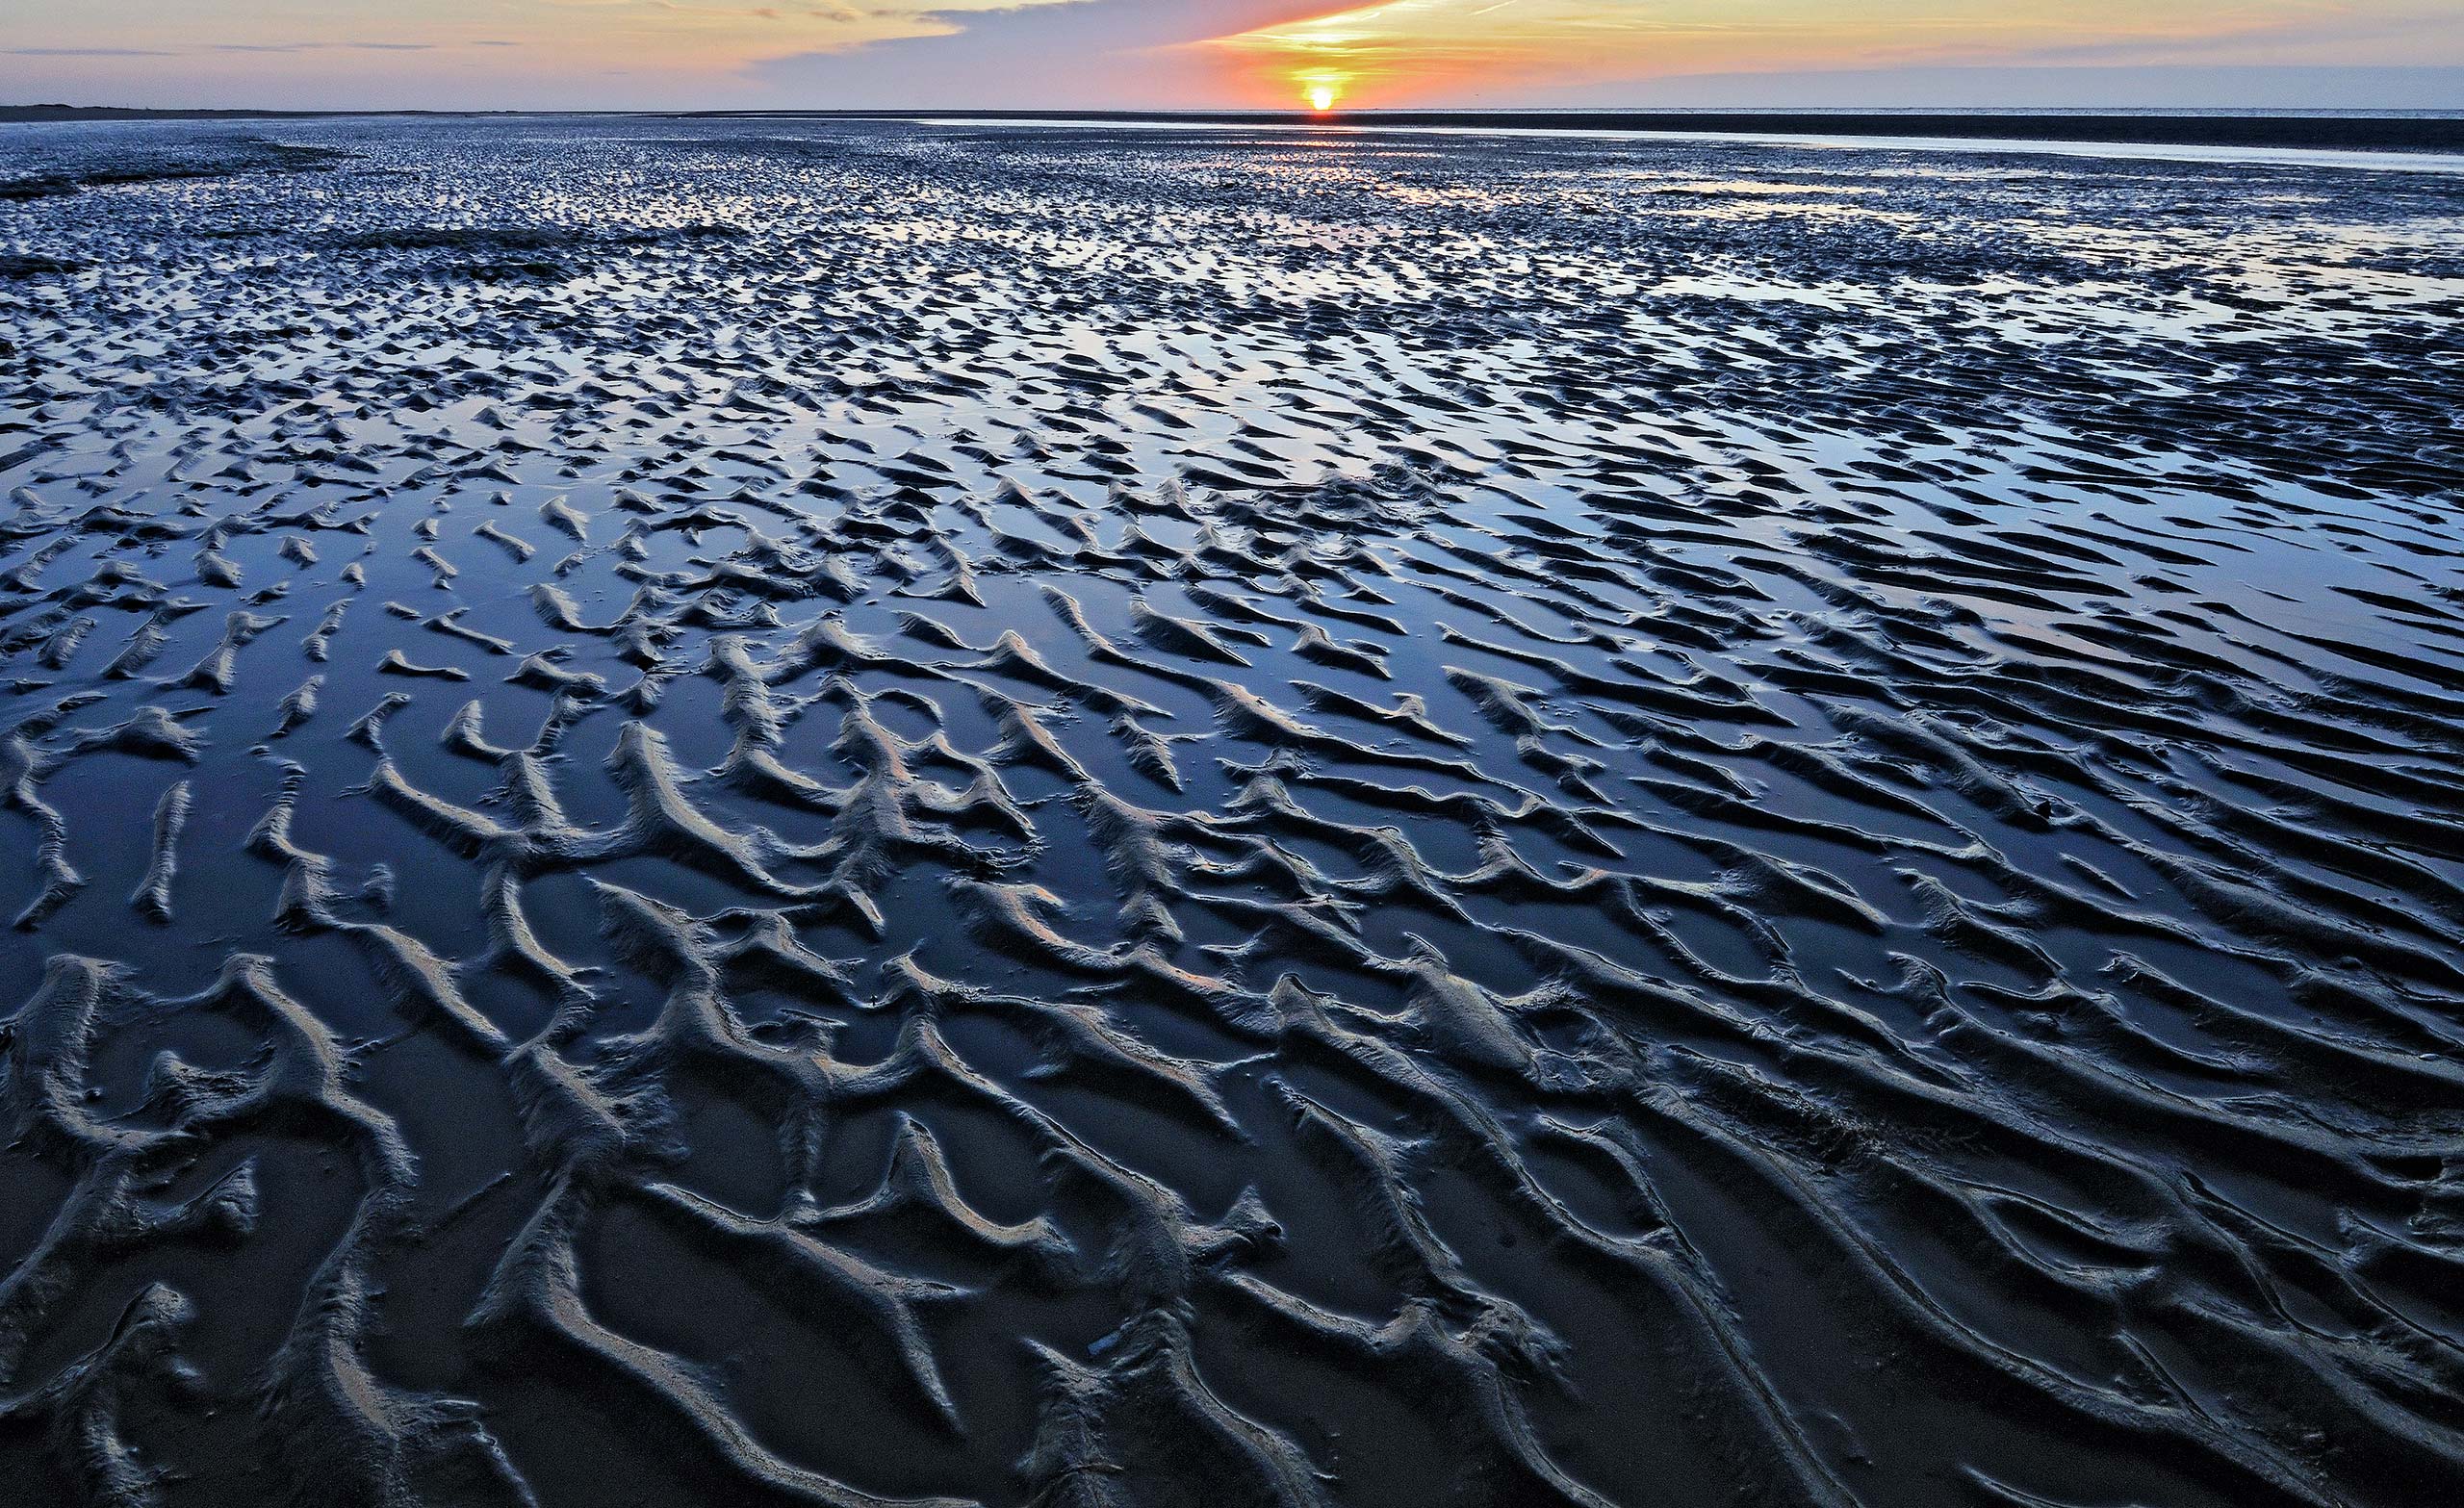 Patterns on the beach of Kwade Hoek at sunset.